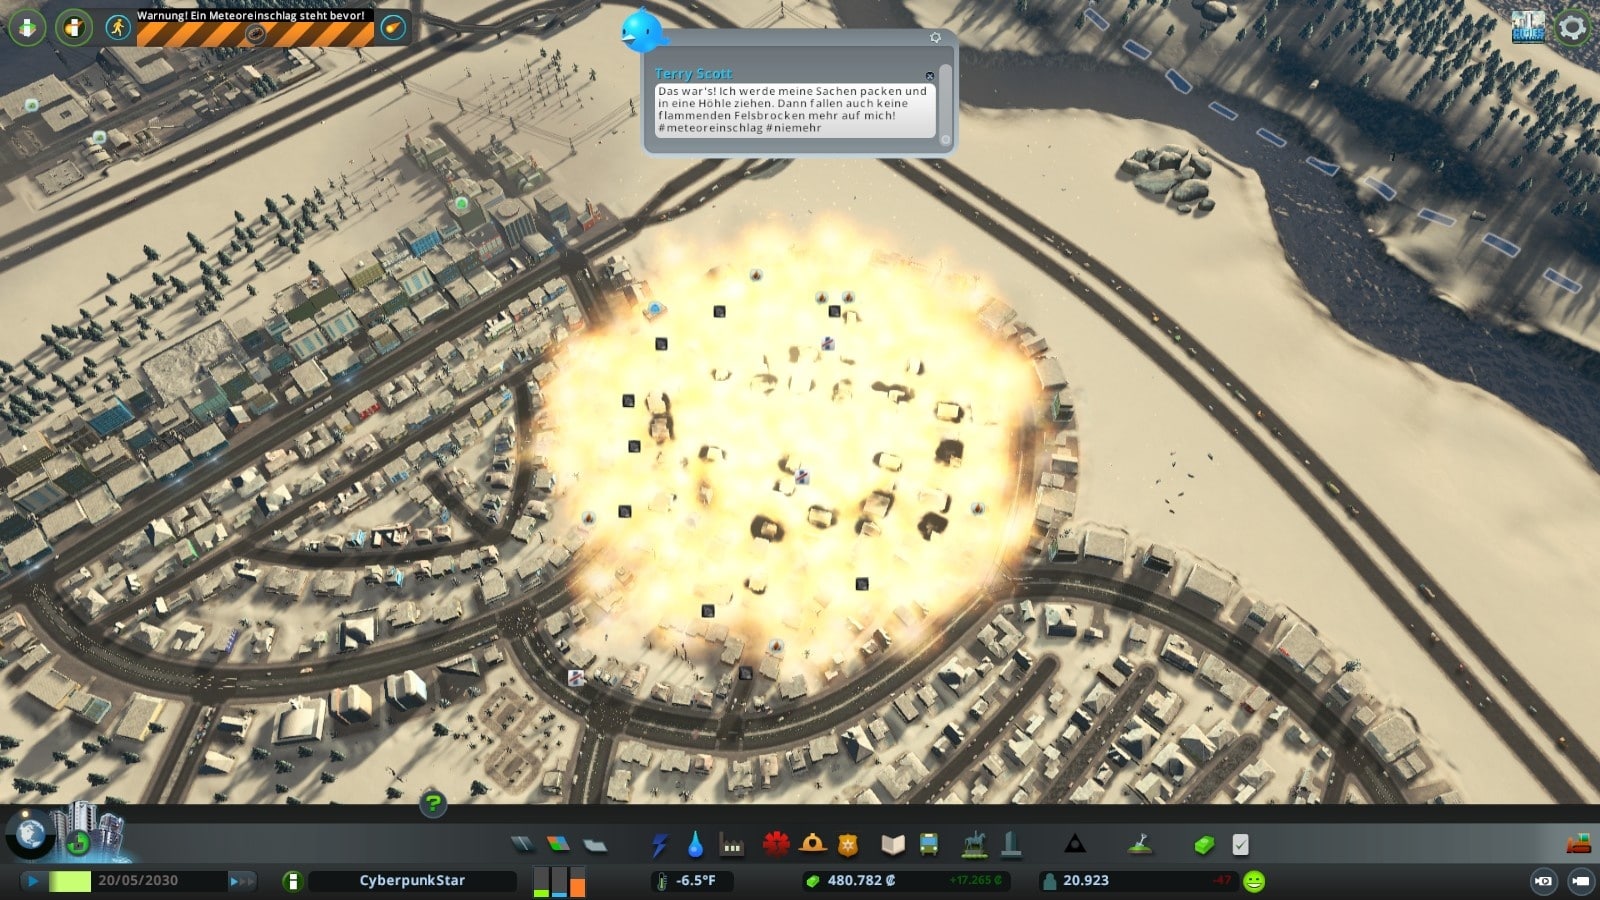 Our citizens complain about the catastrophic meteorite.